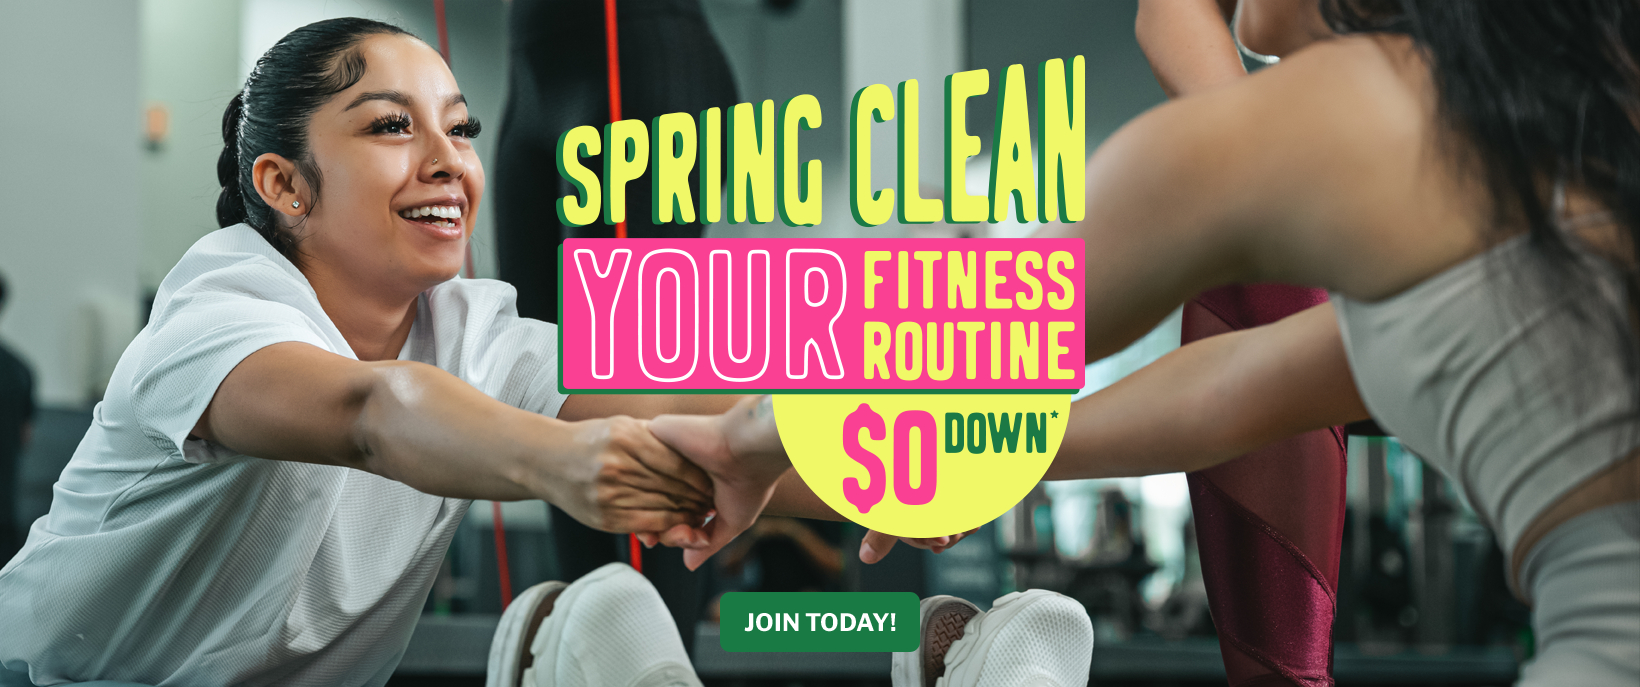 spring clean your fitness routine join for $0 down desktop image